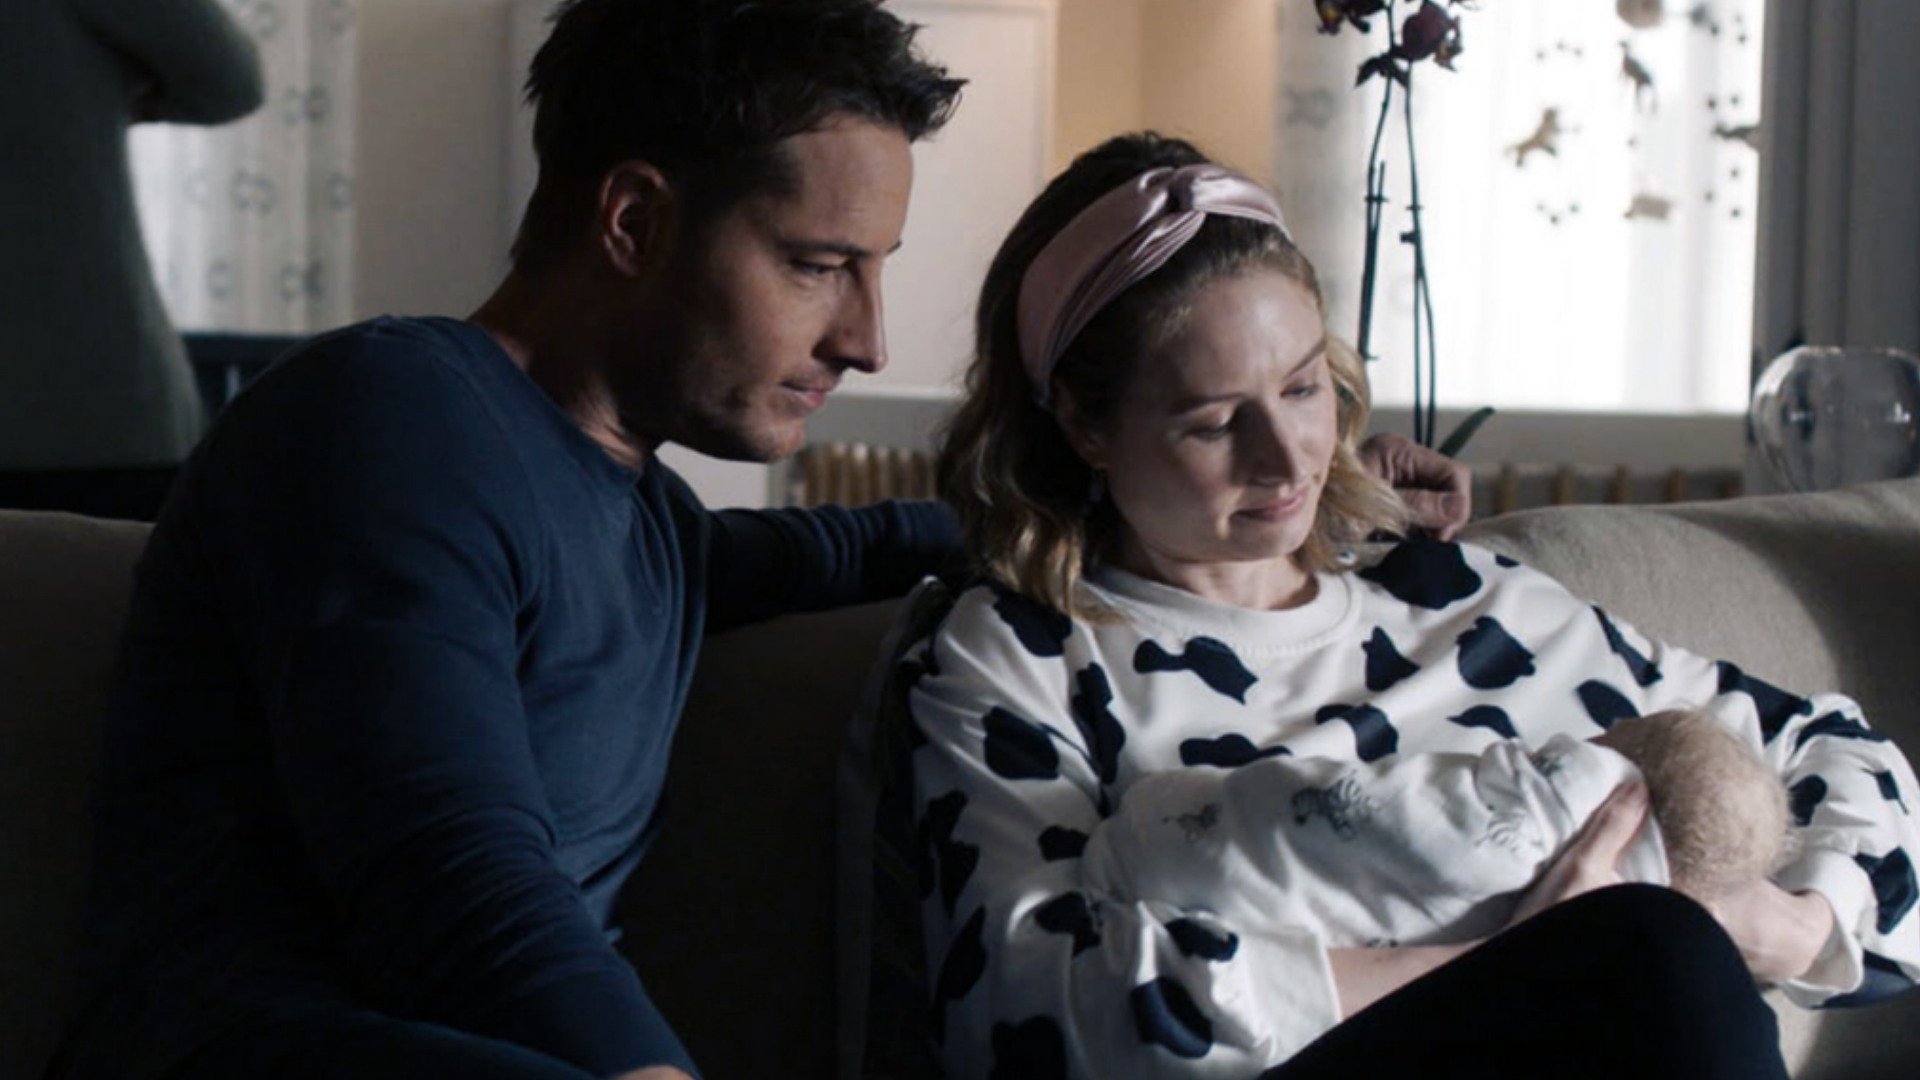 Justin Hartley as Kevin and Caitlin Thompson as Madison sit together and hold their baby in ‘This Is Us’ Season 5